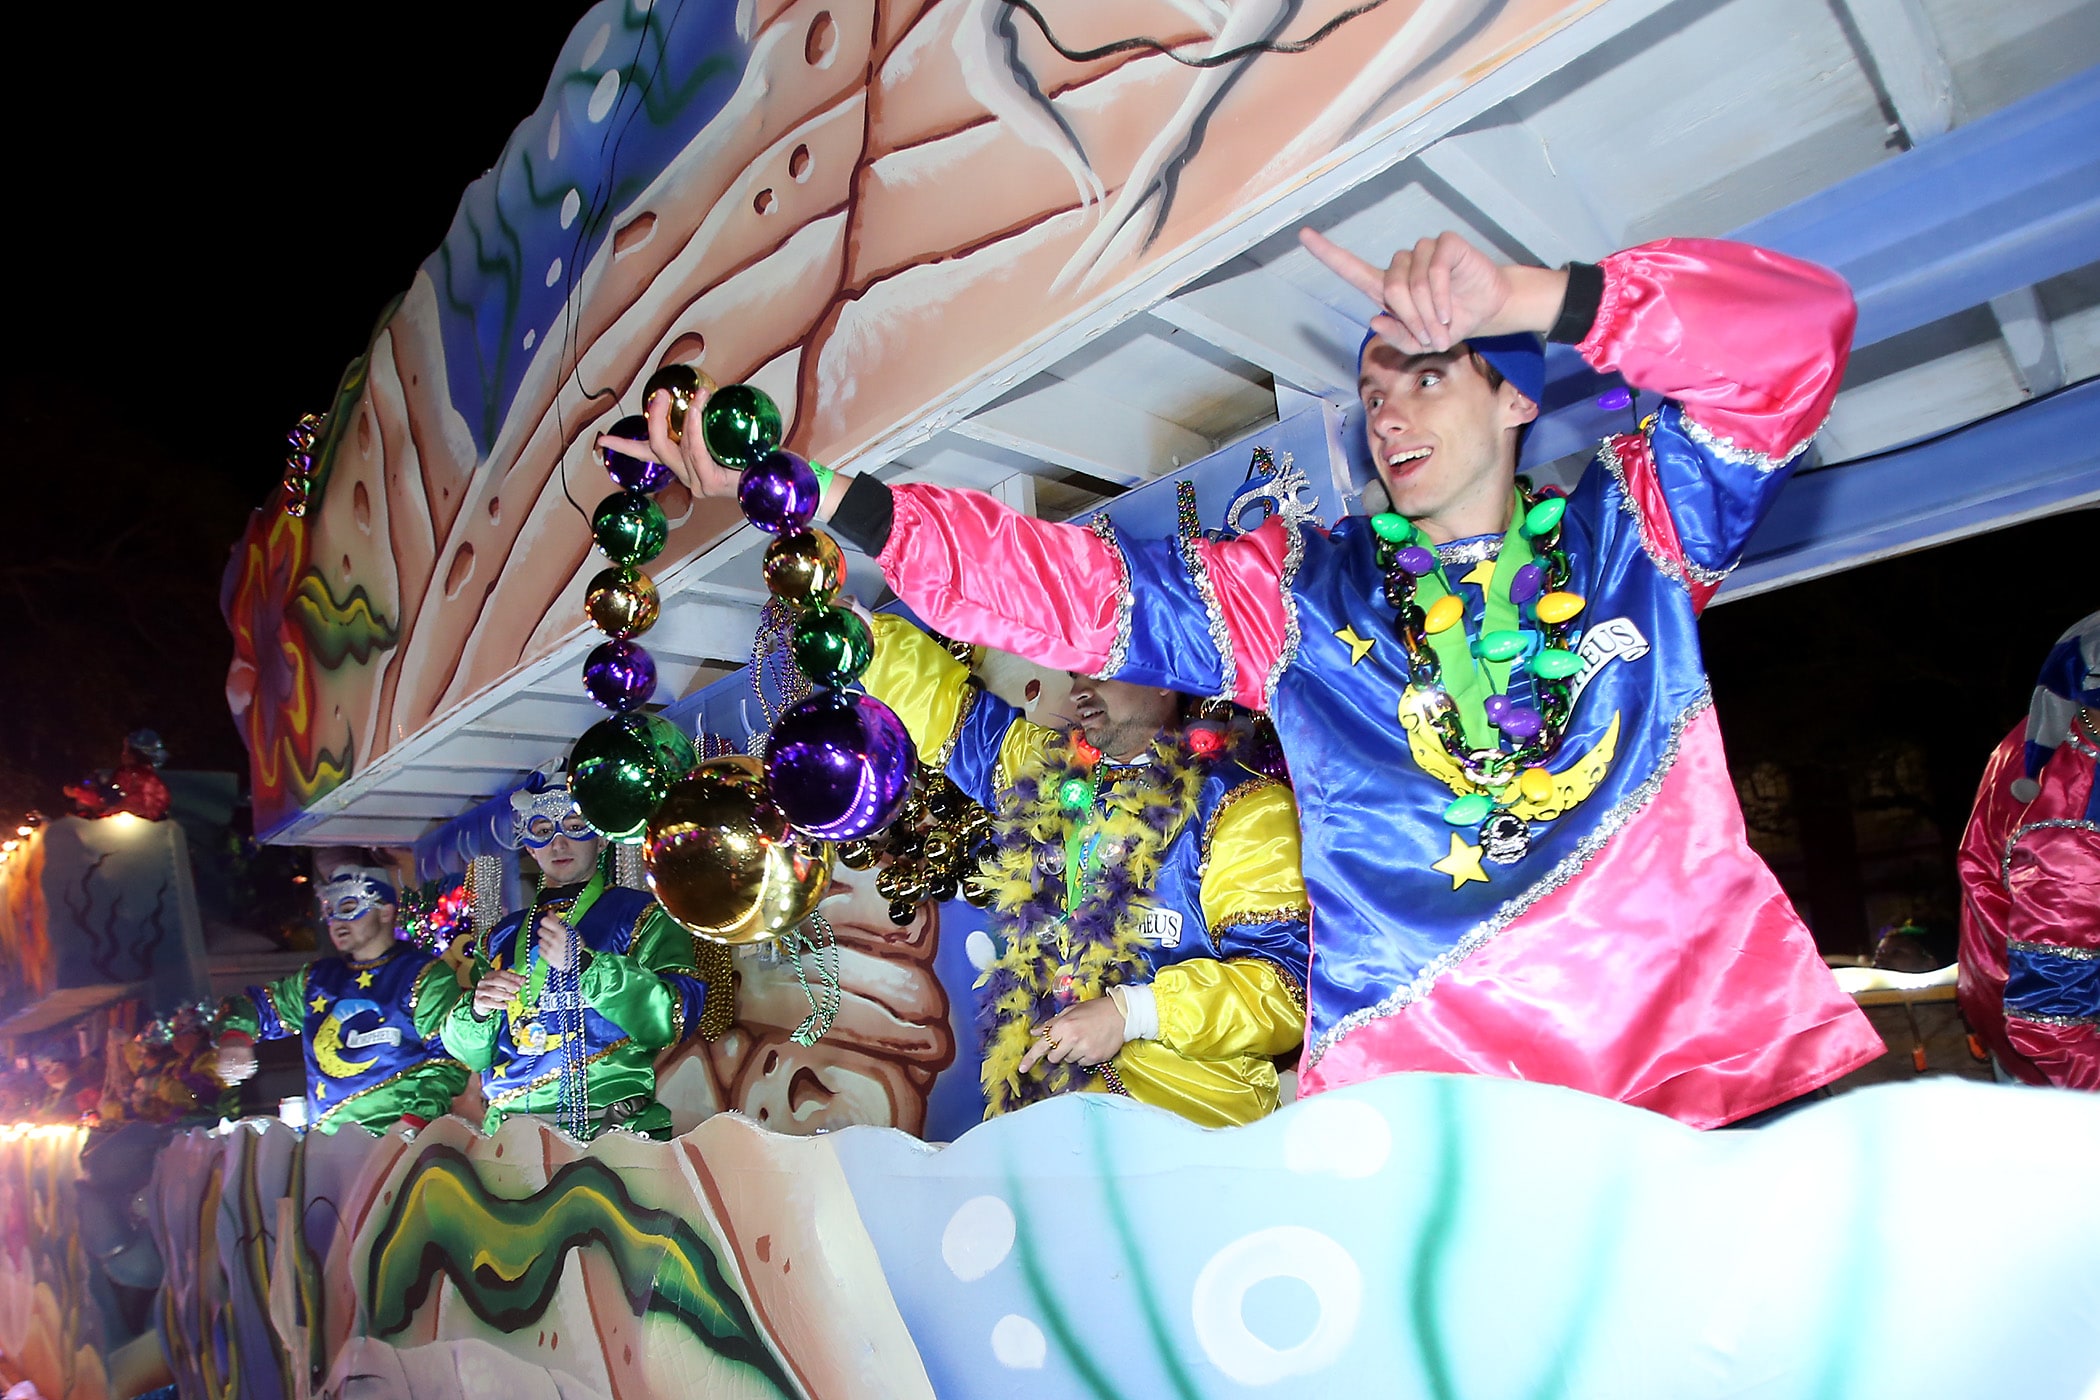 The 800 members of the Krewe of Morpheus roll down the Uptown parade route with a 24-float parade entitled “Morpheus Dreams of Aquatic Adventures” as they celebrate their 20th year on Friday, February 21, 2020. (Photo by Michael DeMocker)